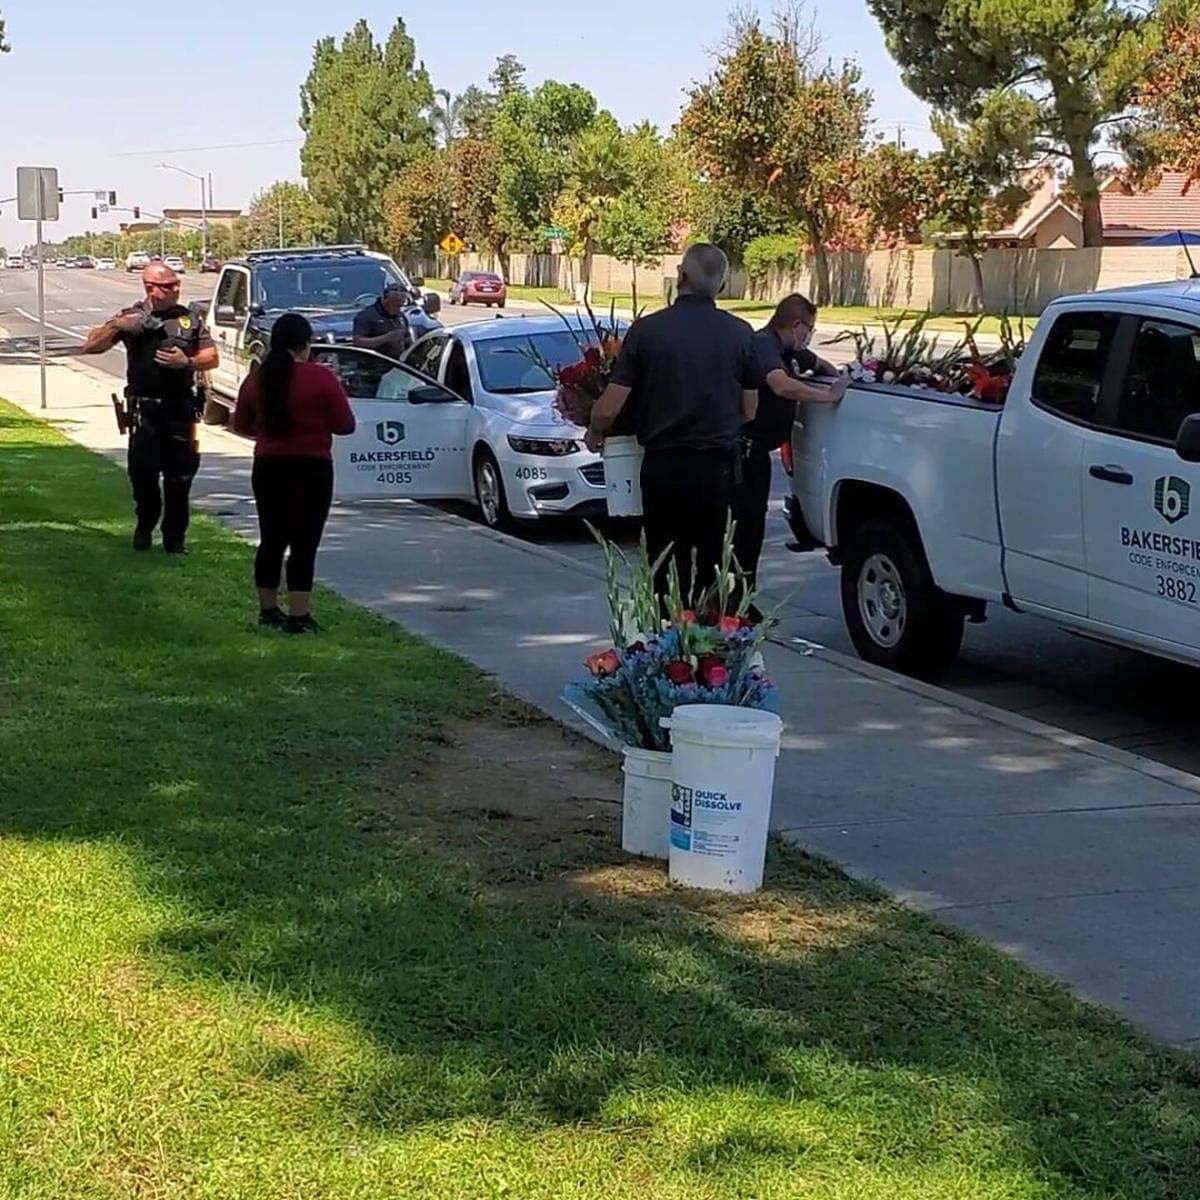 Bakersfield attorney Richard Middlebrooke defends teenager arrested for selling flowers on the street